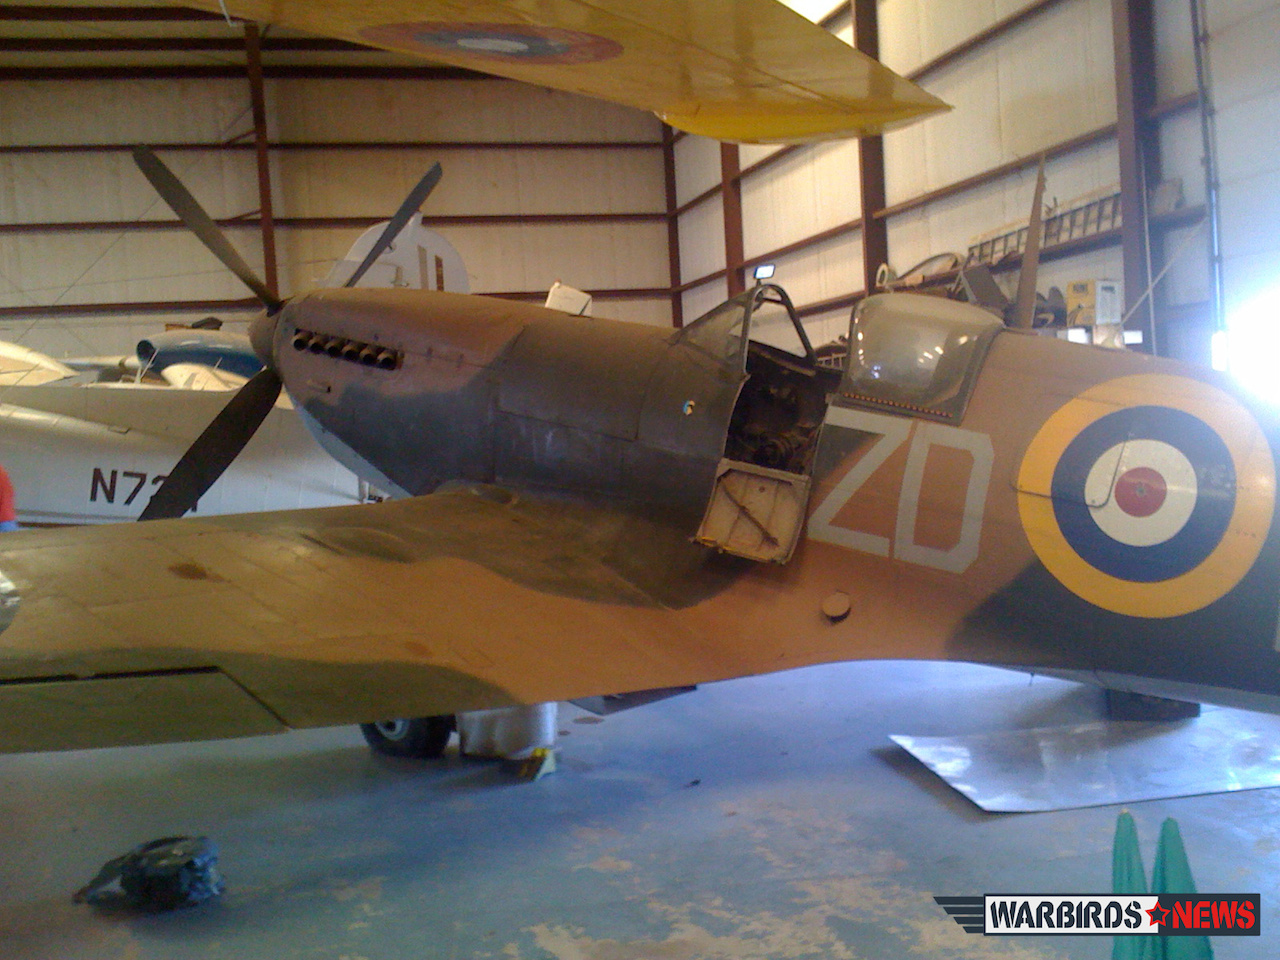 One of the Spitfires Connie Edwards acquired as part of his role in making the film "Battle of Britain". (photo from a friend of the Edwards family)